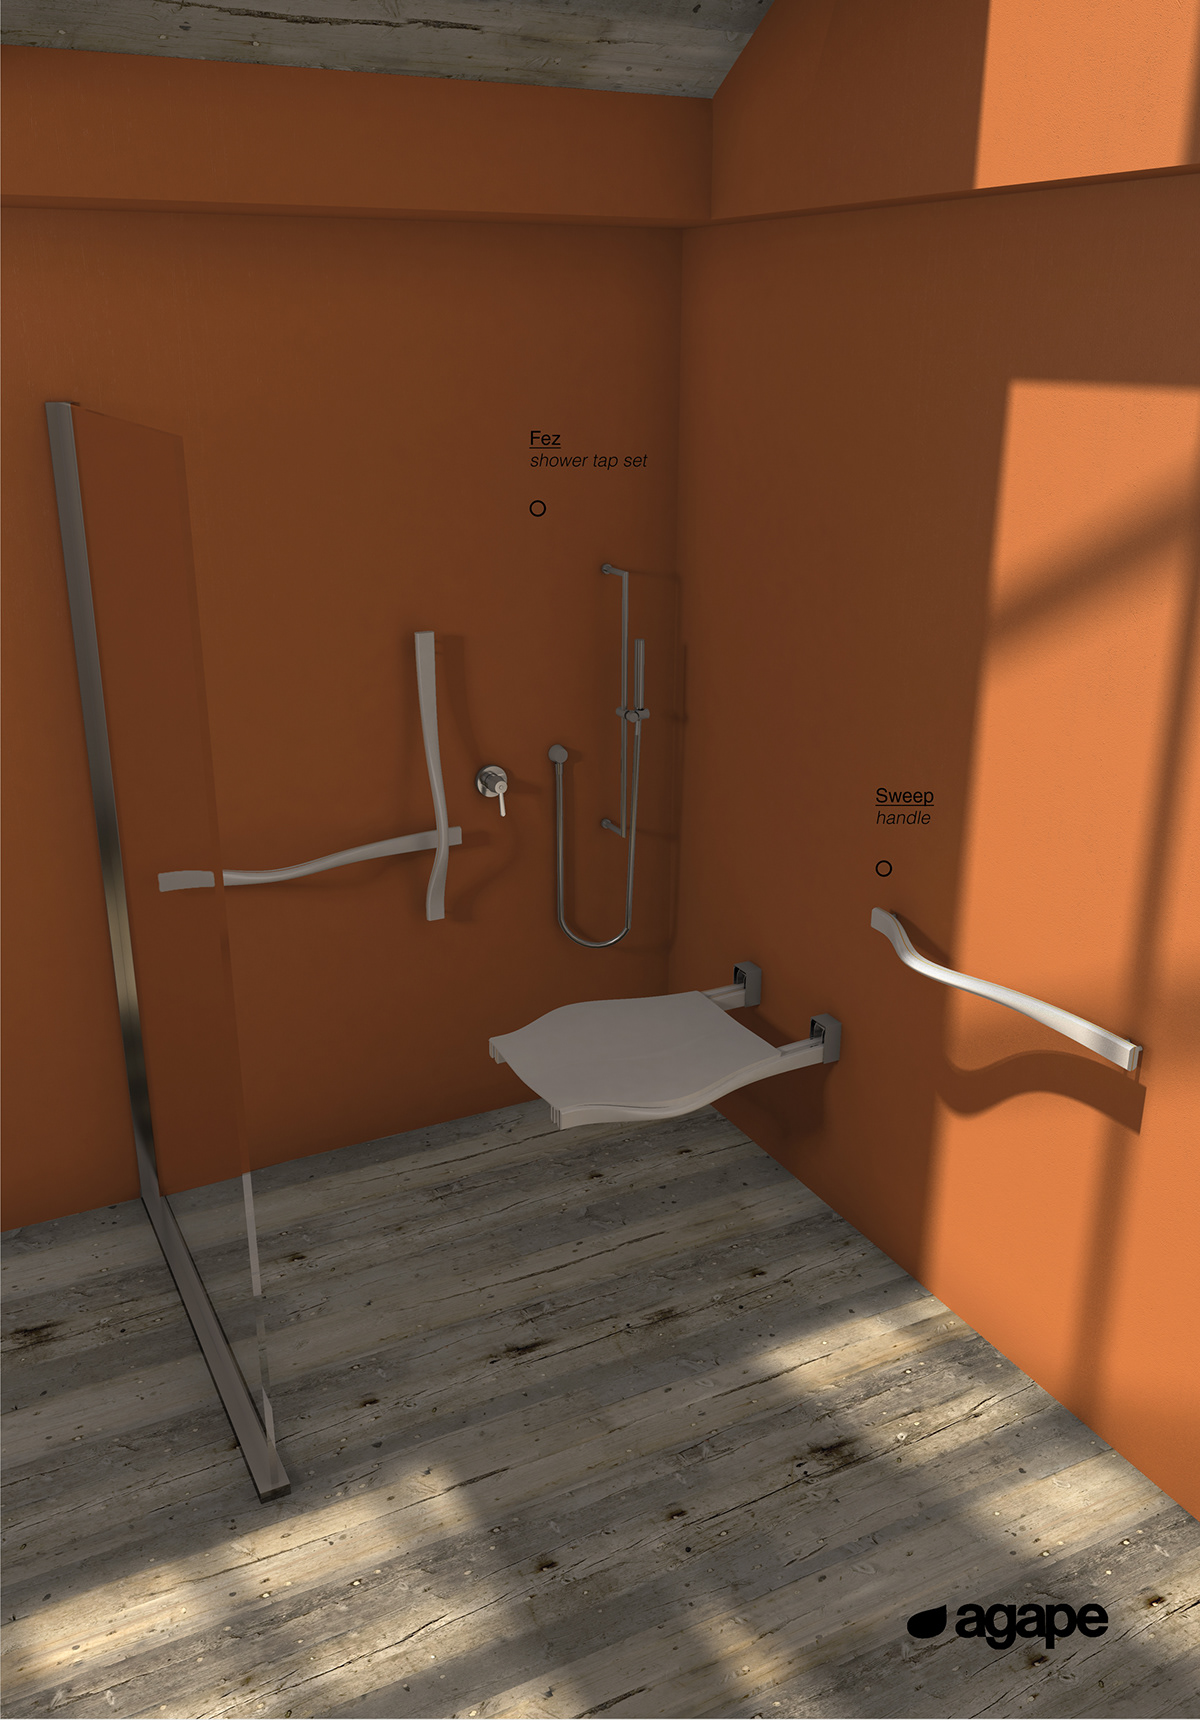 #inclusive design #people with disabilities # shower seat #handle #agape